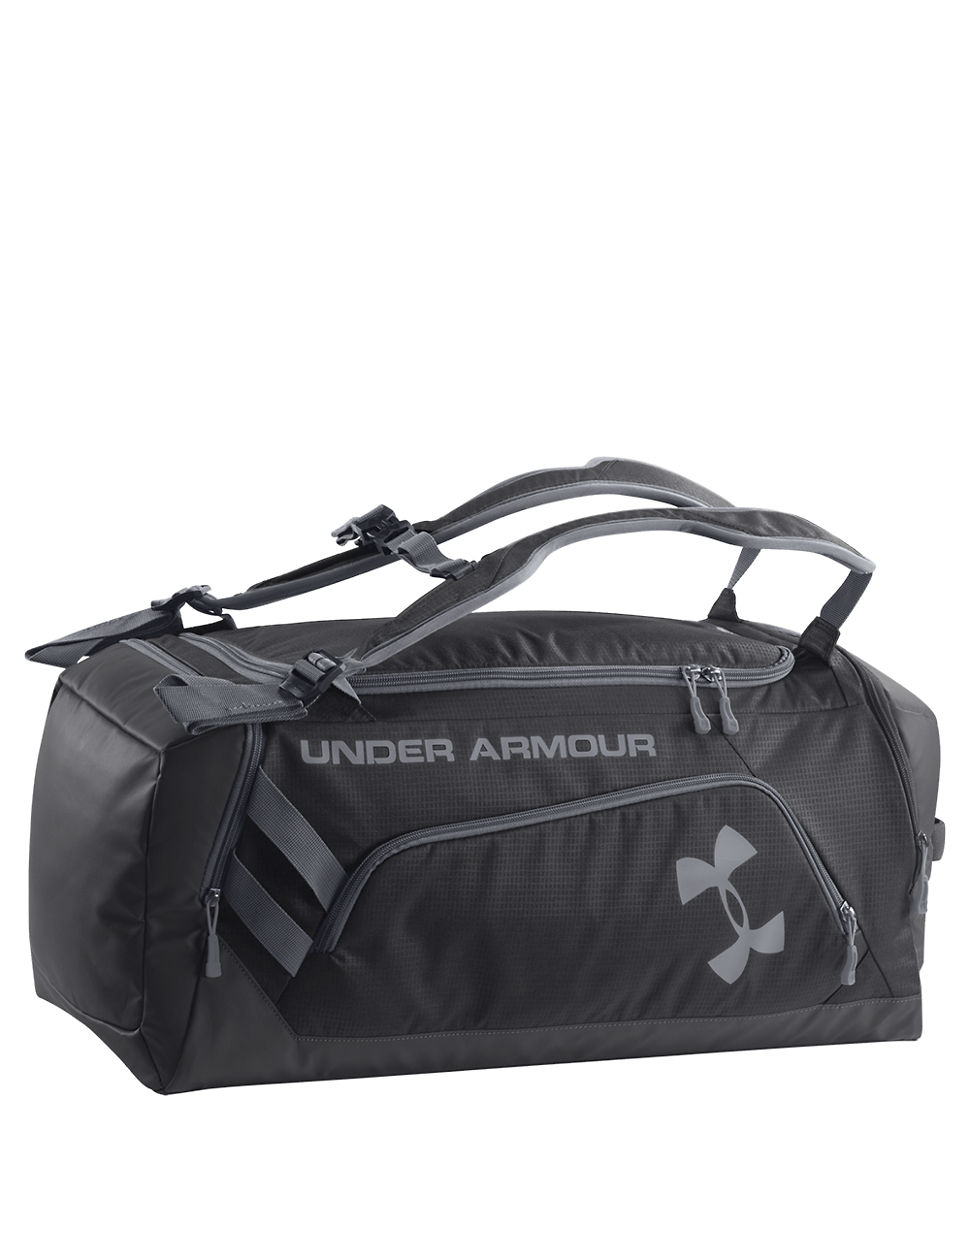 Under Armour Storm Contain Backpack Duffel Bag in Black for Men - Lyst